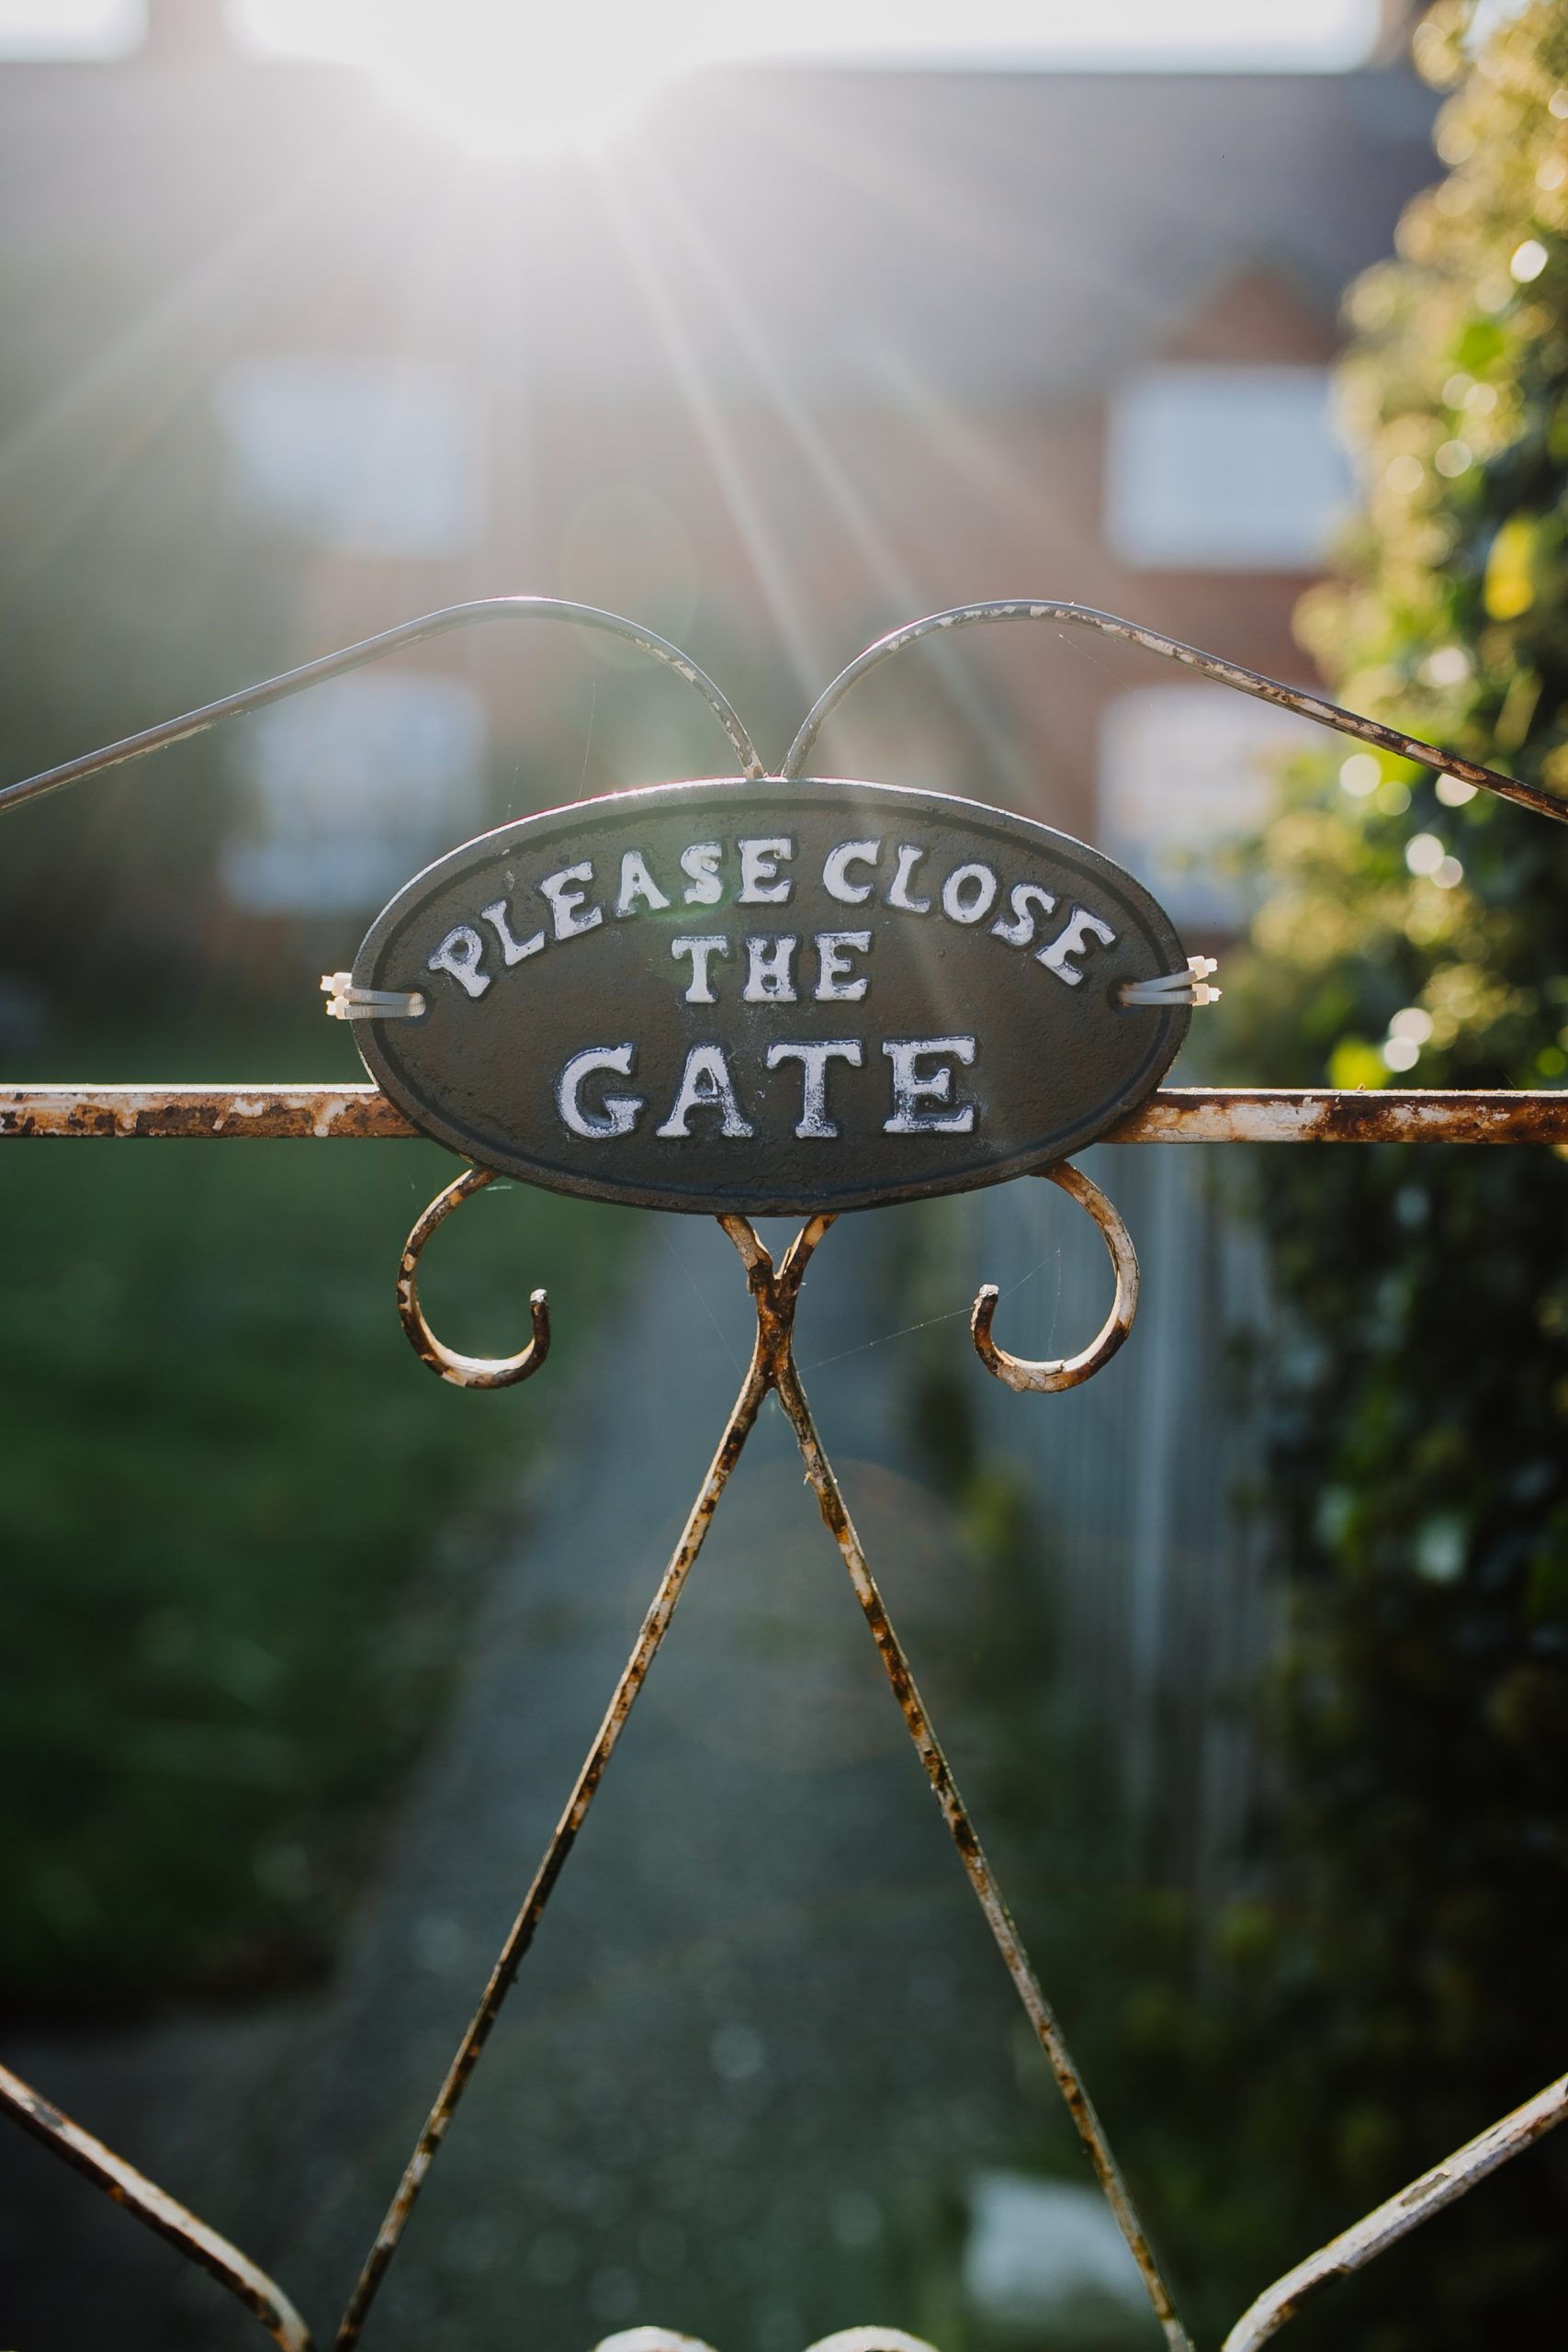 Worthwhile Upgrades That Will Give Your Home a Facelift - Garden GAte